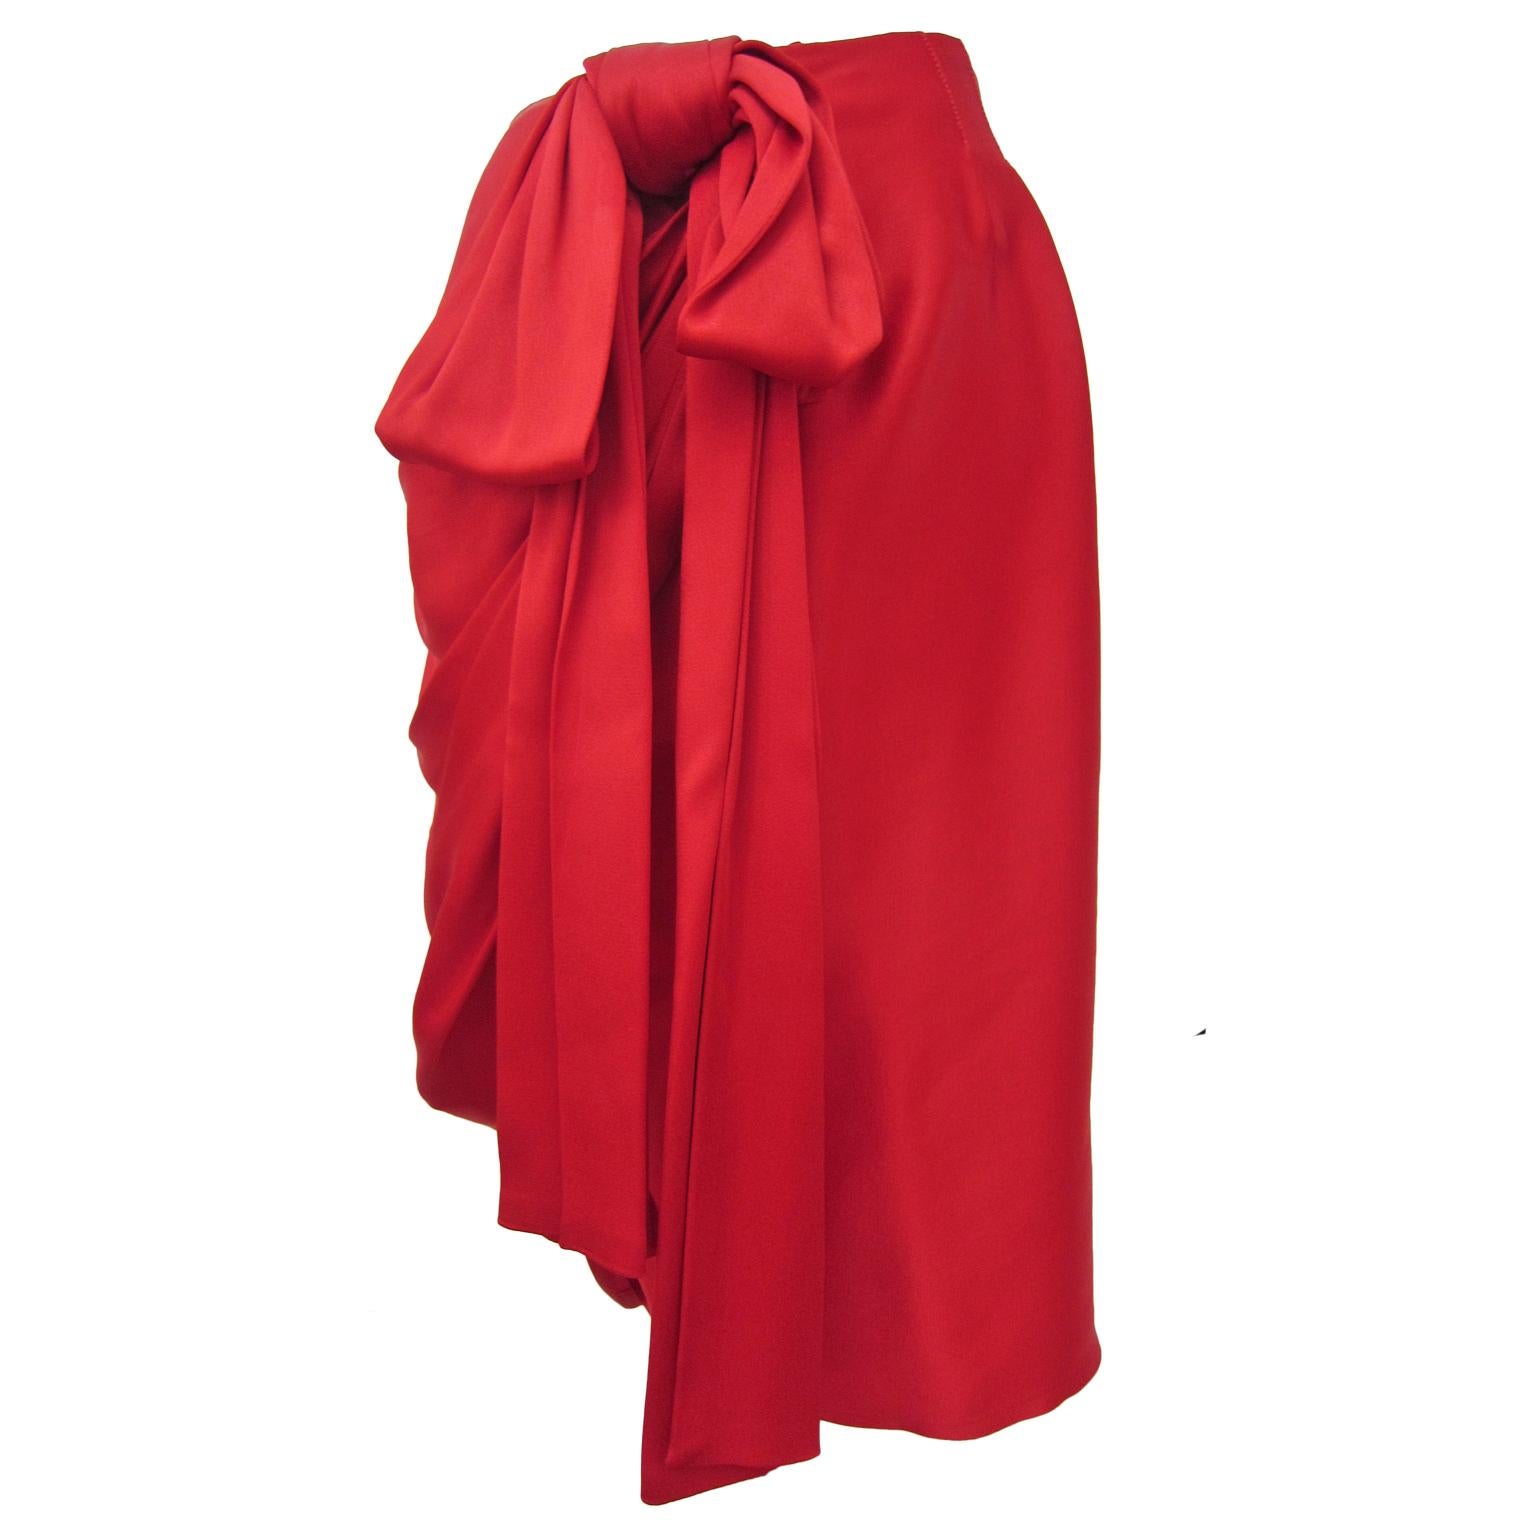 Women's YSL Rive Gauche Royal Red Satin Skirt With Bow 1985